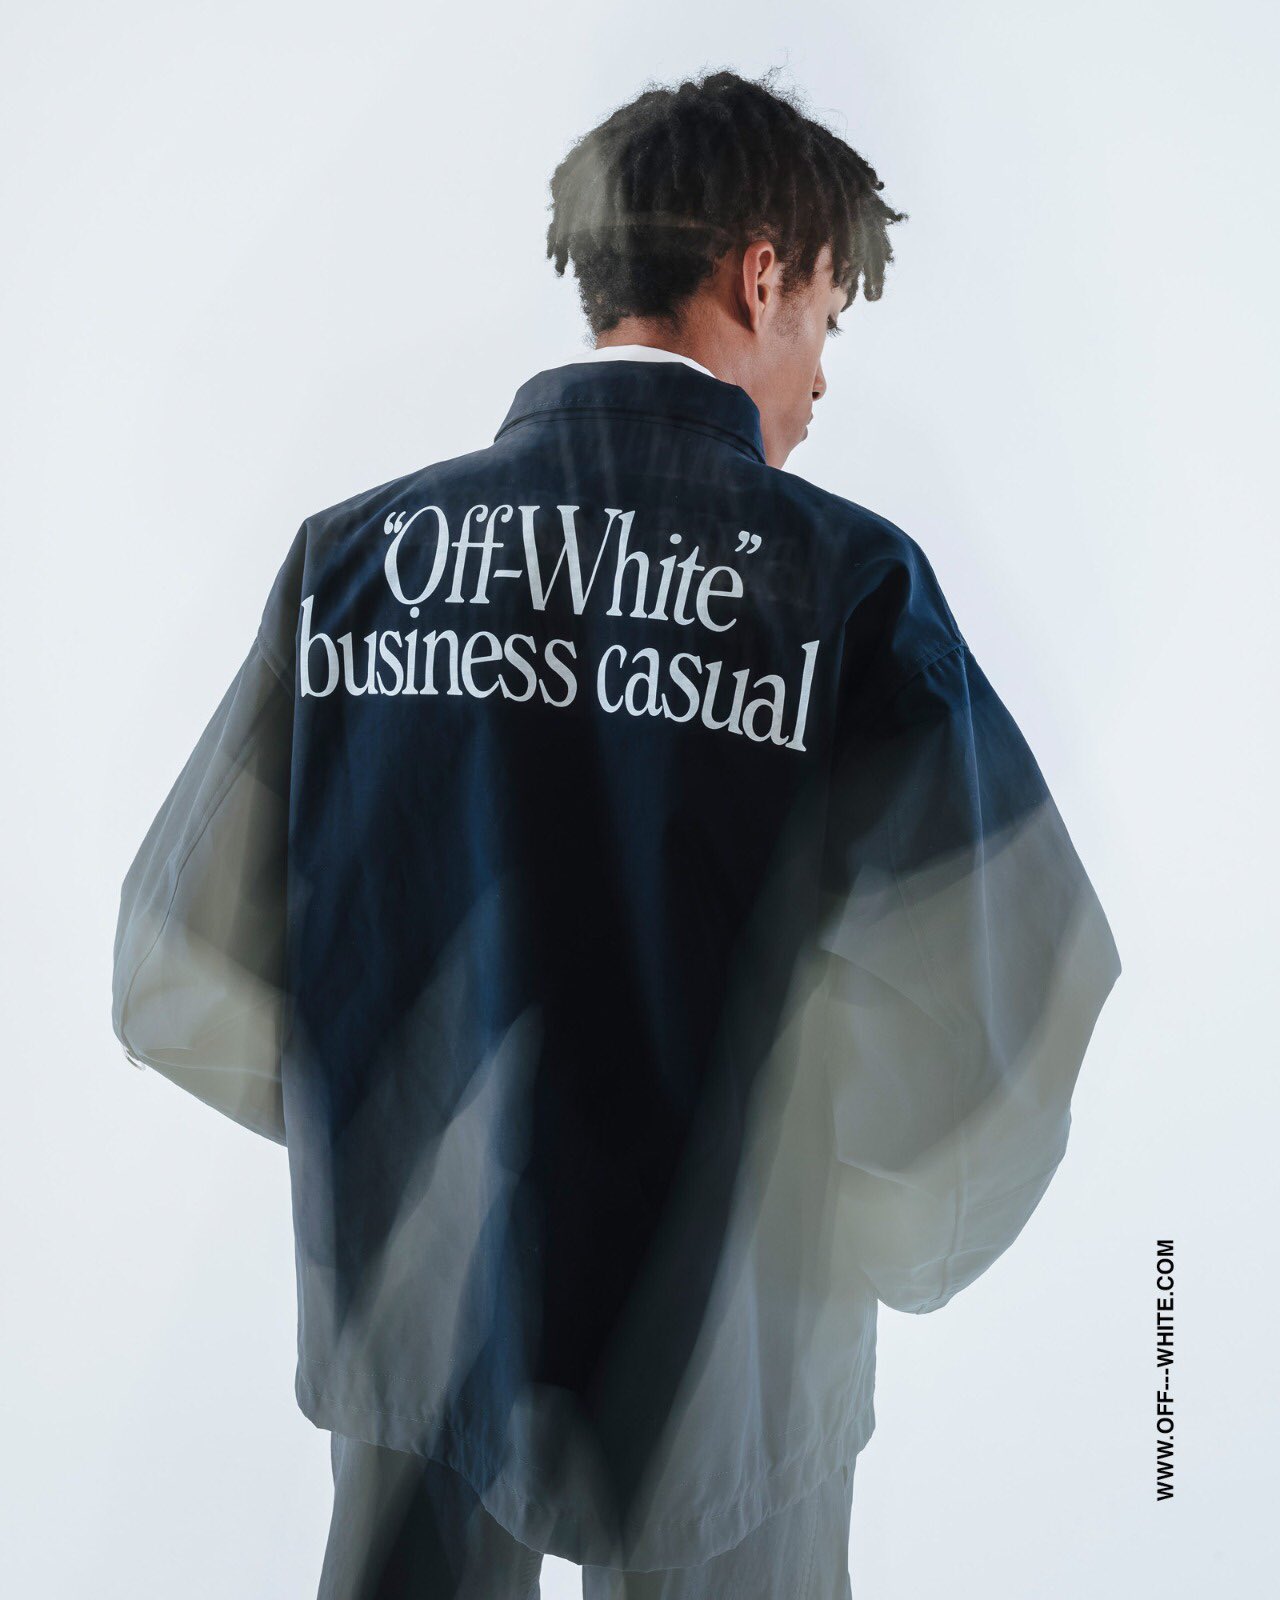 modstå bænk Søg Off-White™ on Twitter: "fw18 men's Off-White™ “Business Casual” collection  campaign image. photography c/o @piotrniepsuj https://t.co/98sxYGrHi7" /  Twitter